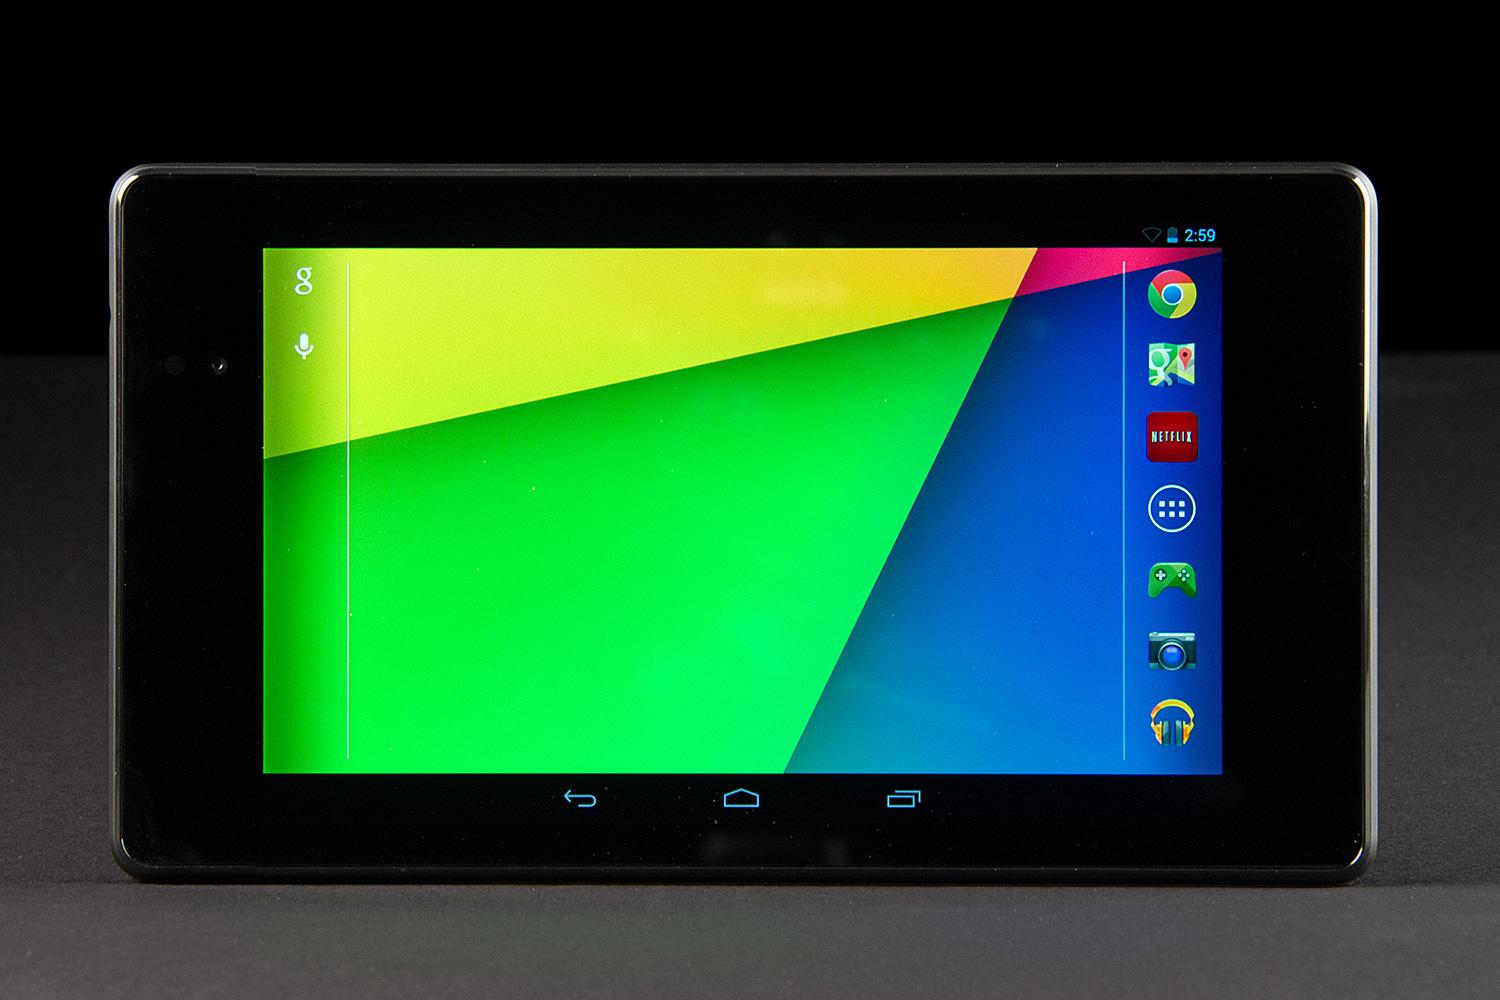 Android 5.1.1 LMY47W for Nexus 7 2013 and LMY47S for Nexus 9 confirmed by Google 1